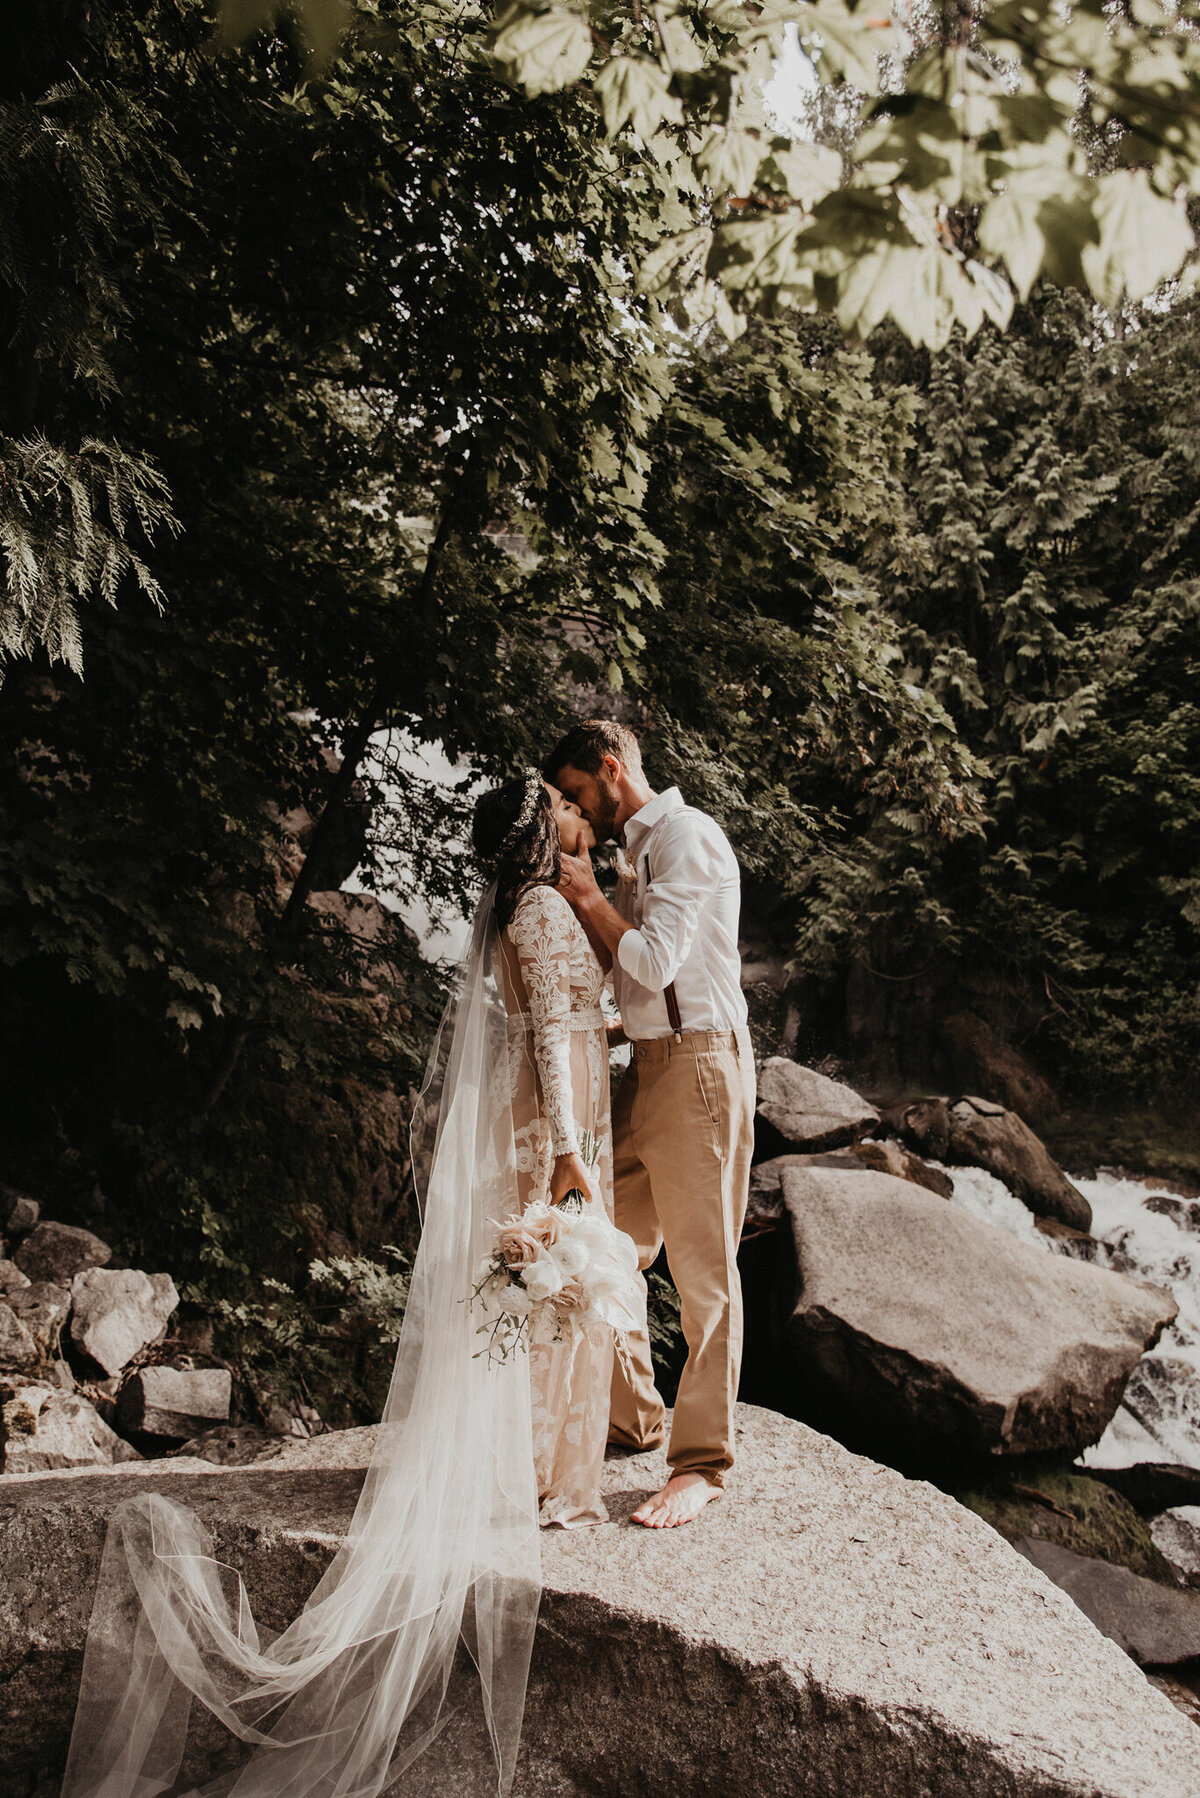 Trendy, boho inspired wedding, bride wearing ivory nude sheer lace gown, groom wearing classic white shirt, tan khakis, and leather suspenders.